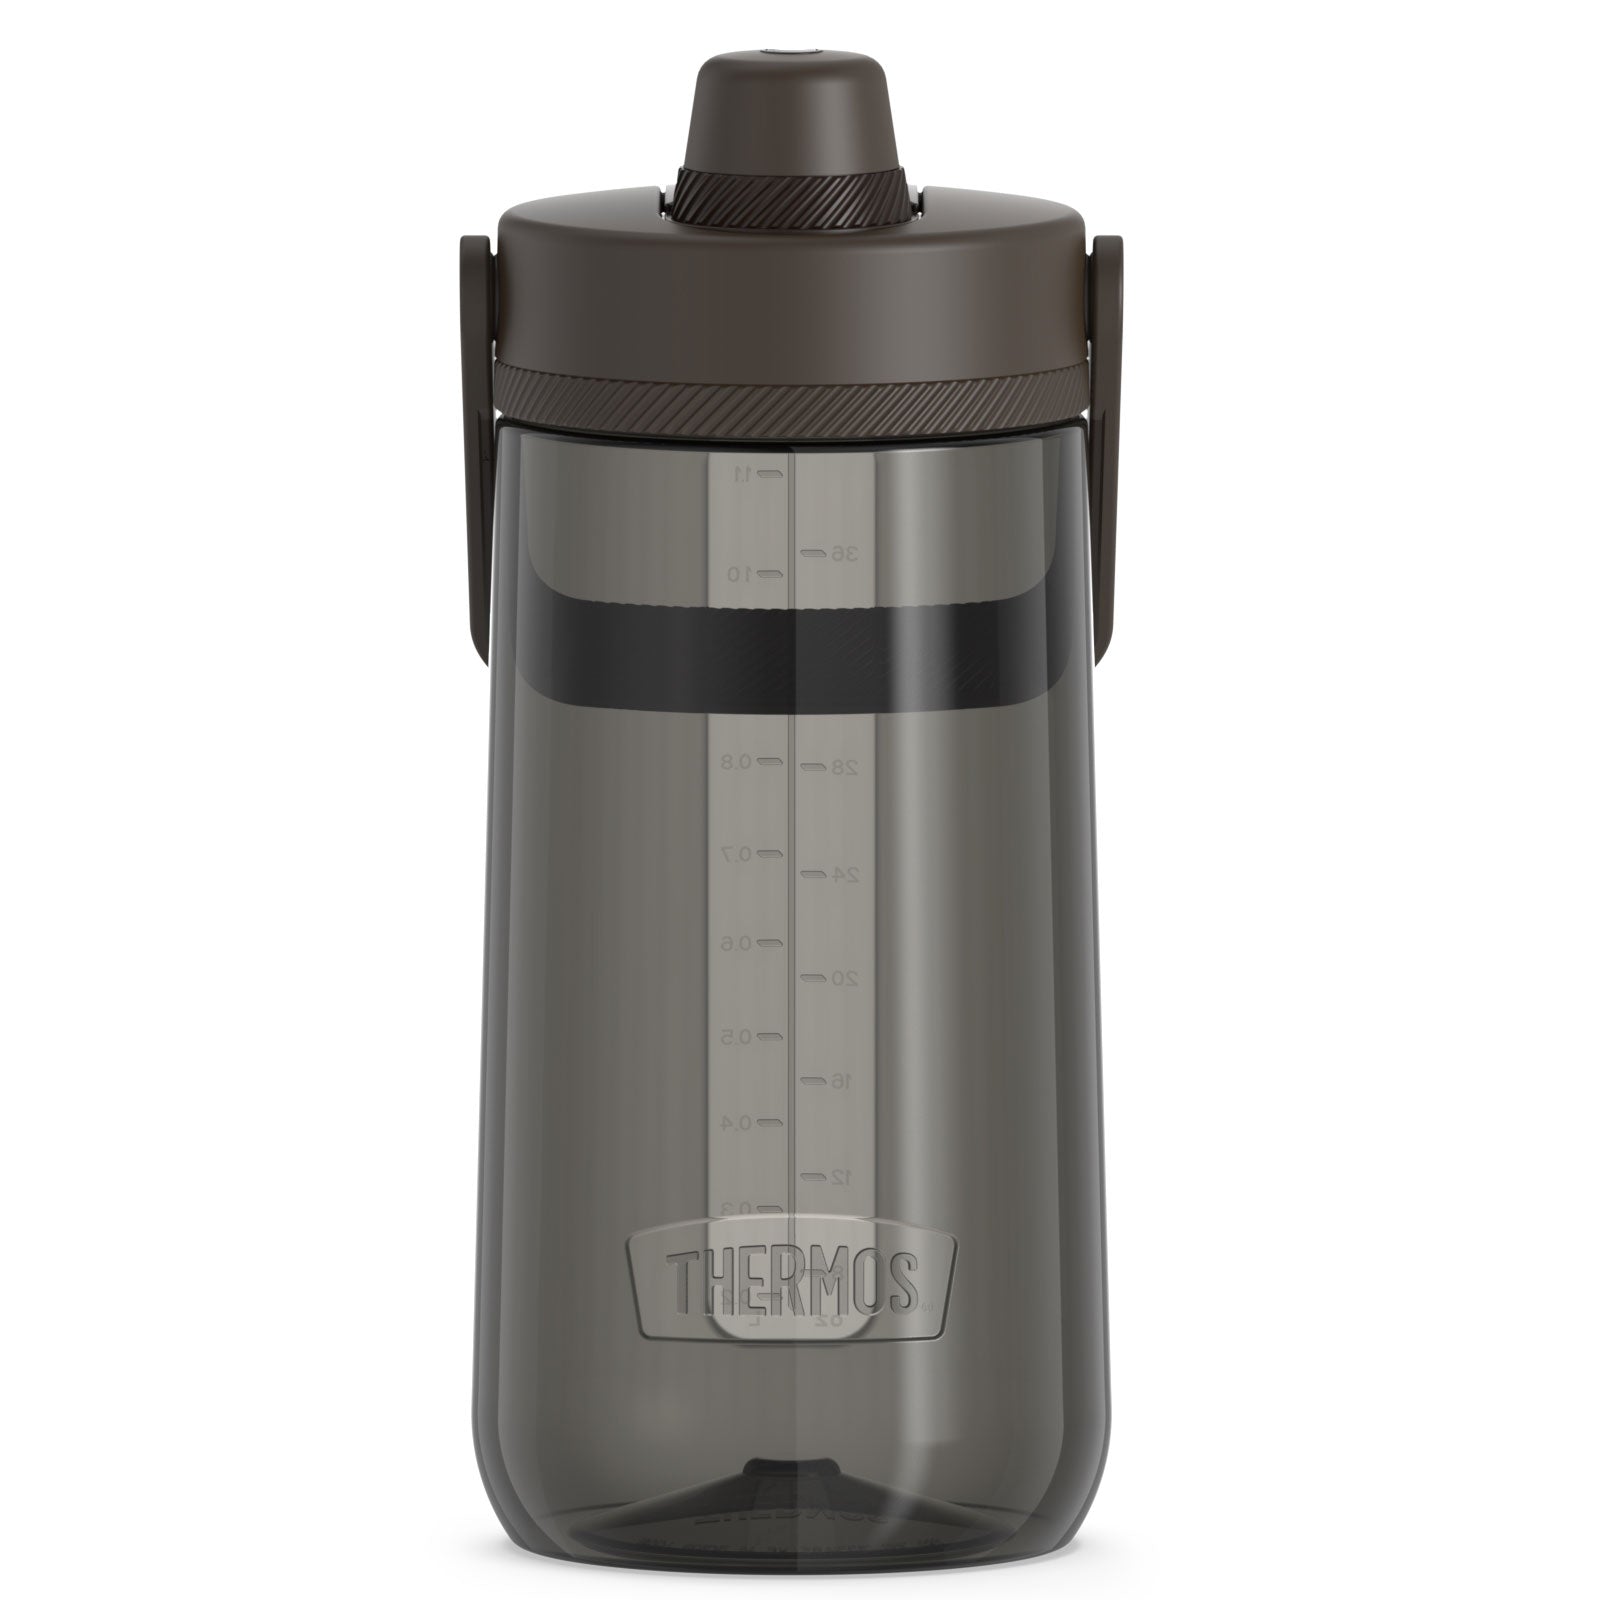 THERMOS Stainless Steel Hydration Bottle, 24 Ounce, Espresso Black